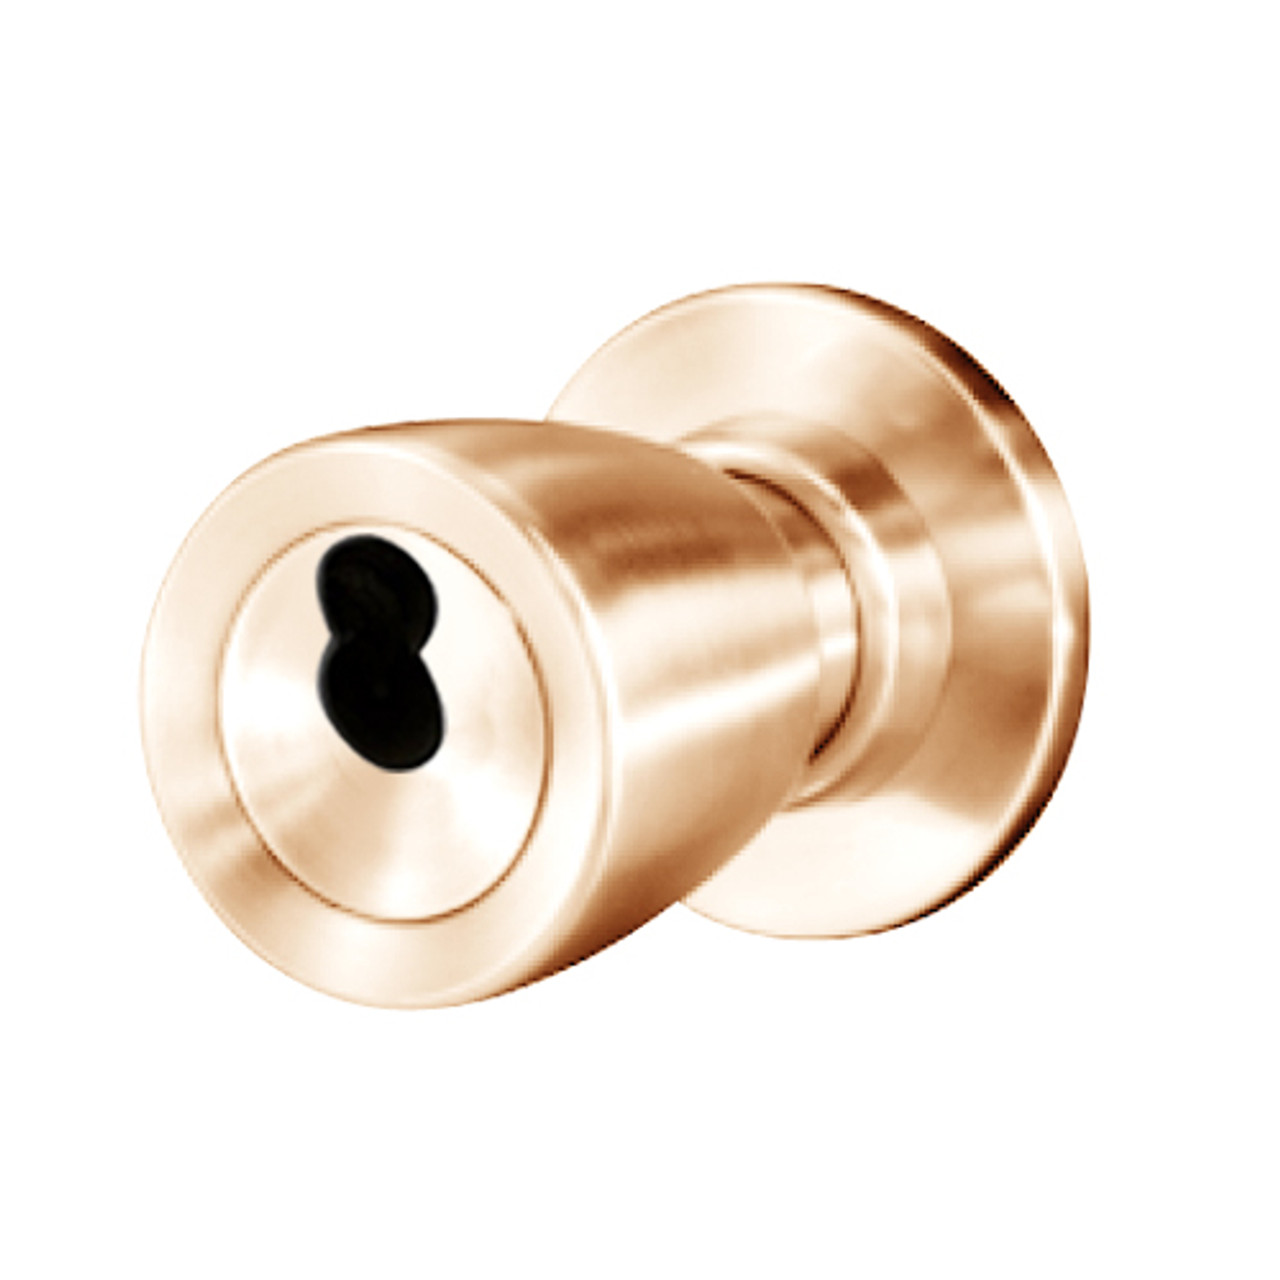 8K57YD6CS3611 Best 8K Series Exit Heavy Duty Cylindrical Knob Locks with Tulip Style in Bright Bronze